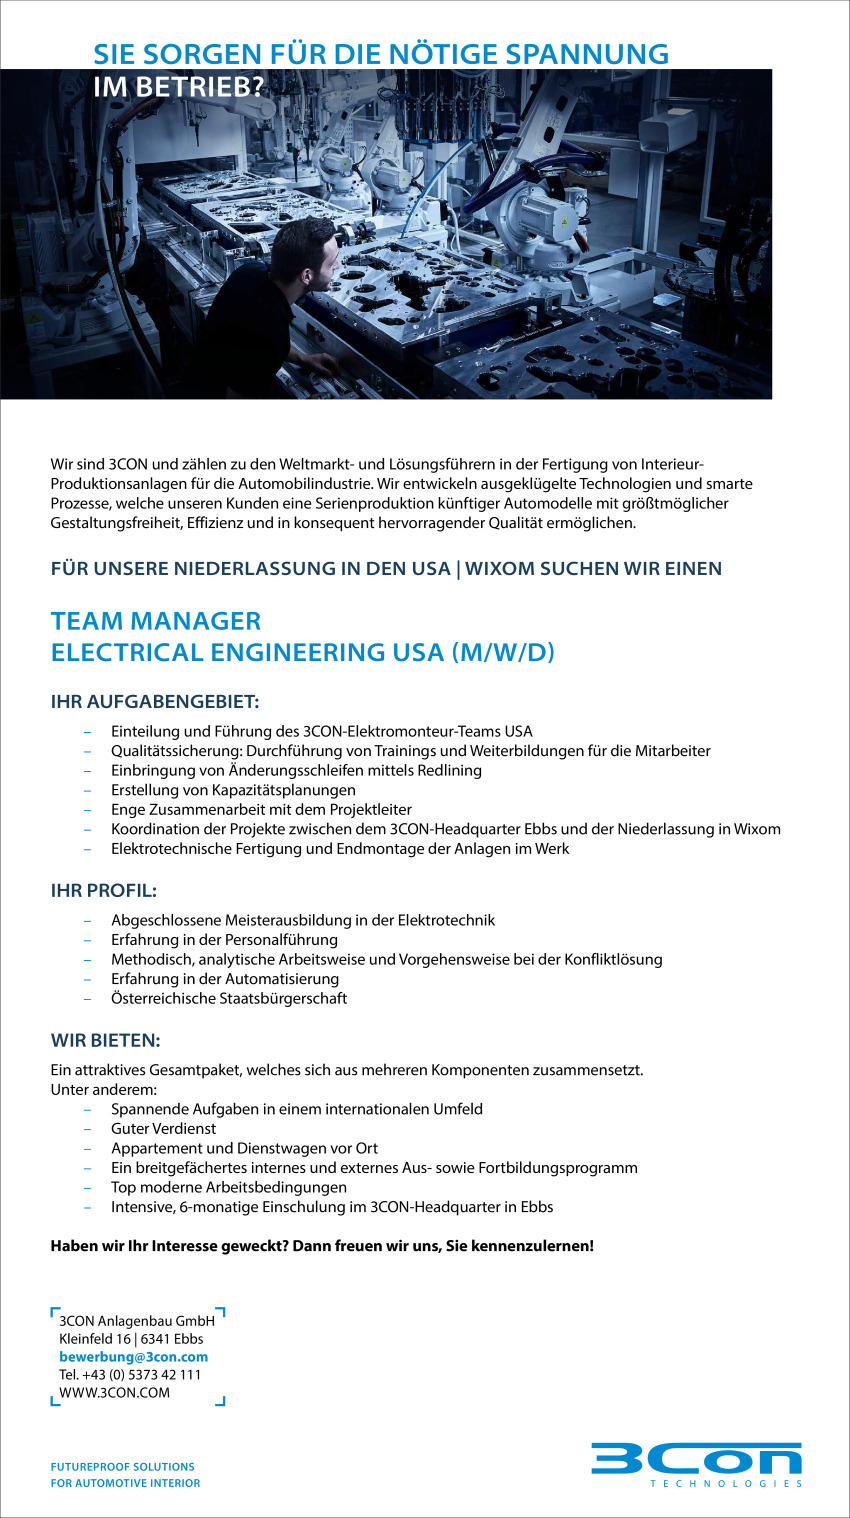 Team Manager Electrical Engineering USA (M/W/D)